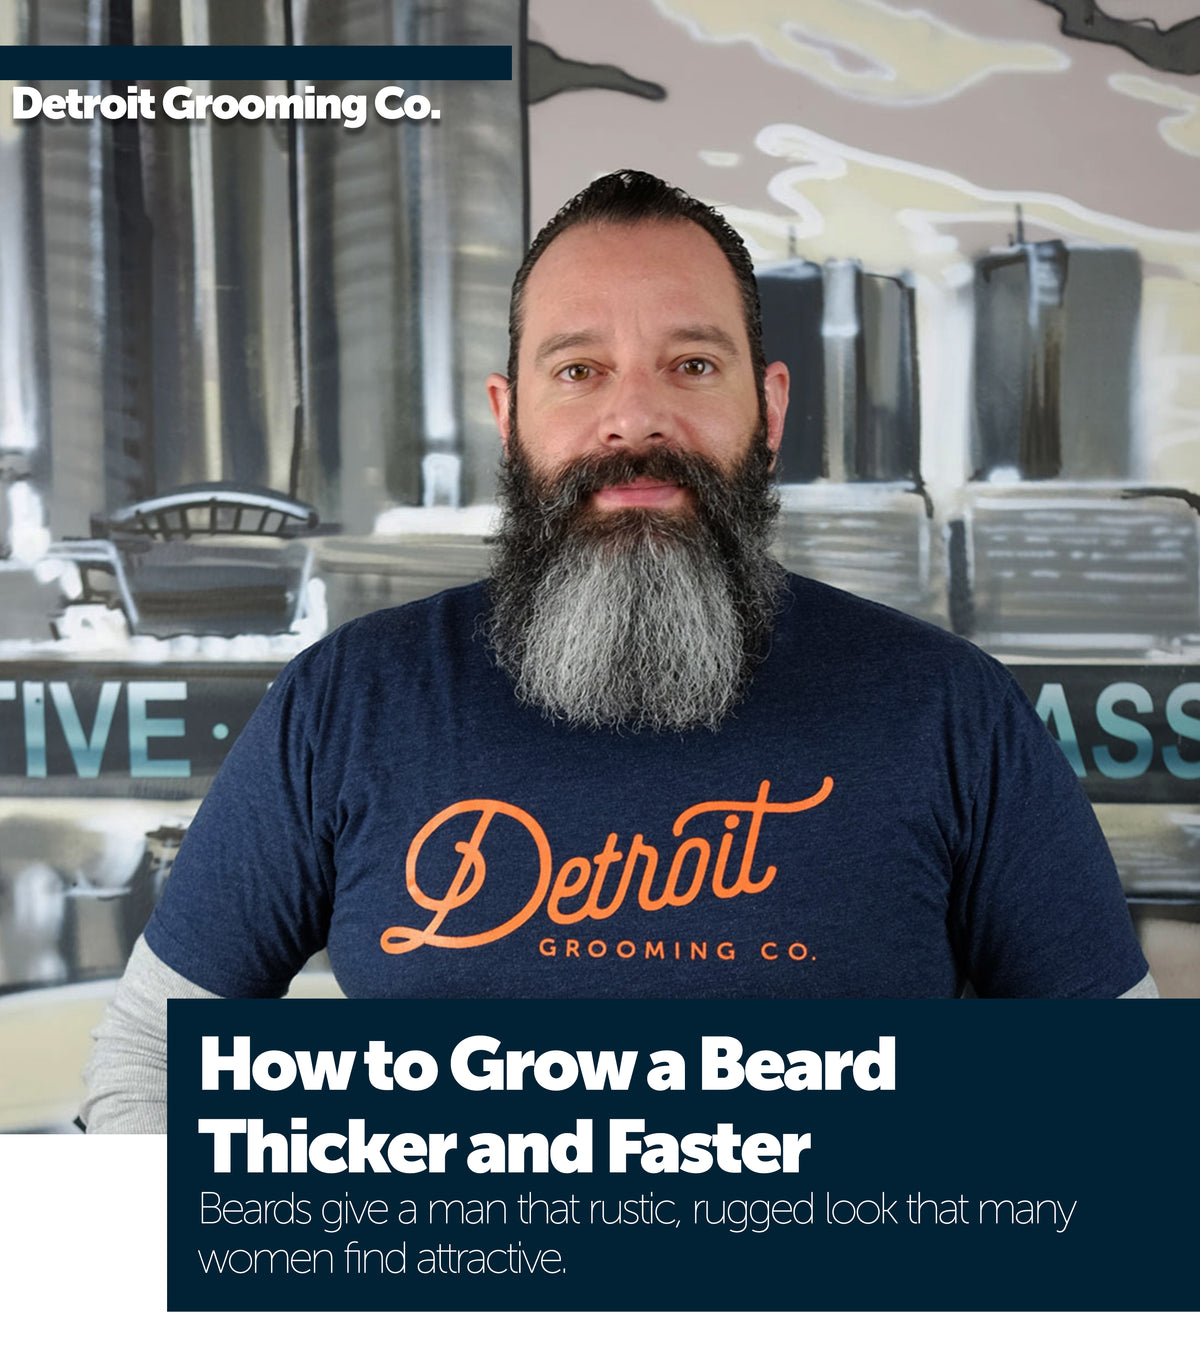 How to Grow a Beard Thicker and Faster